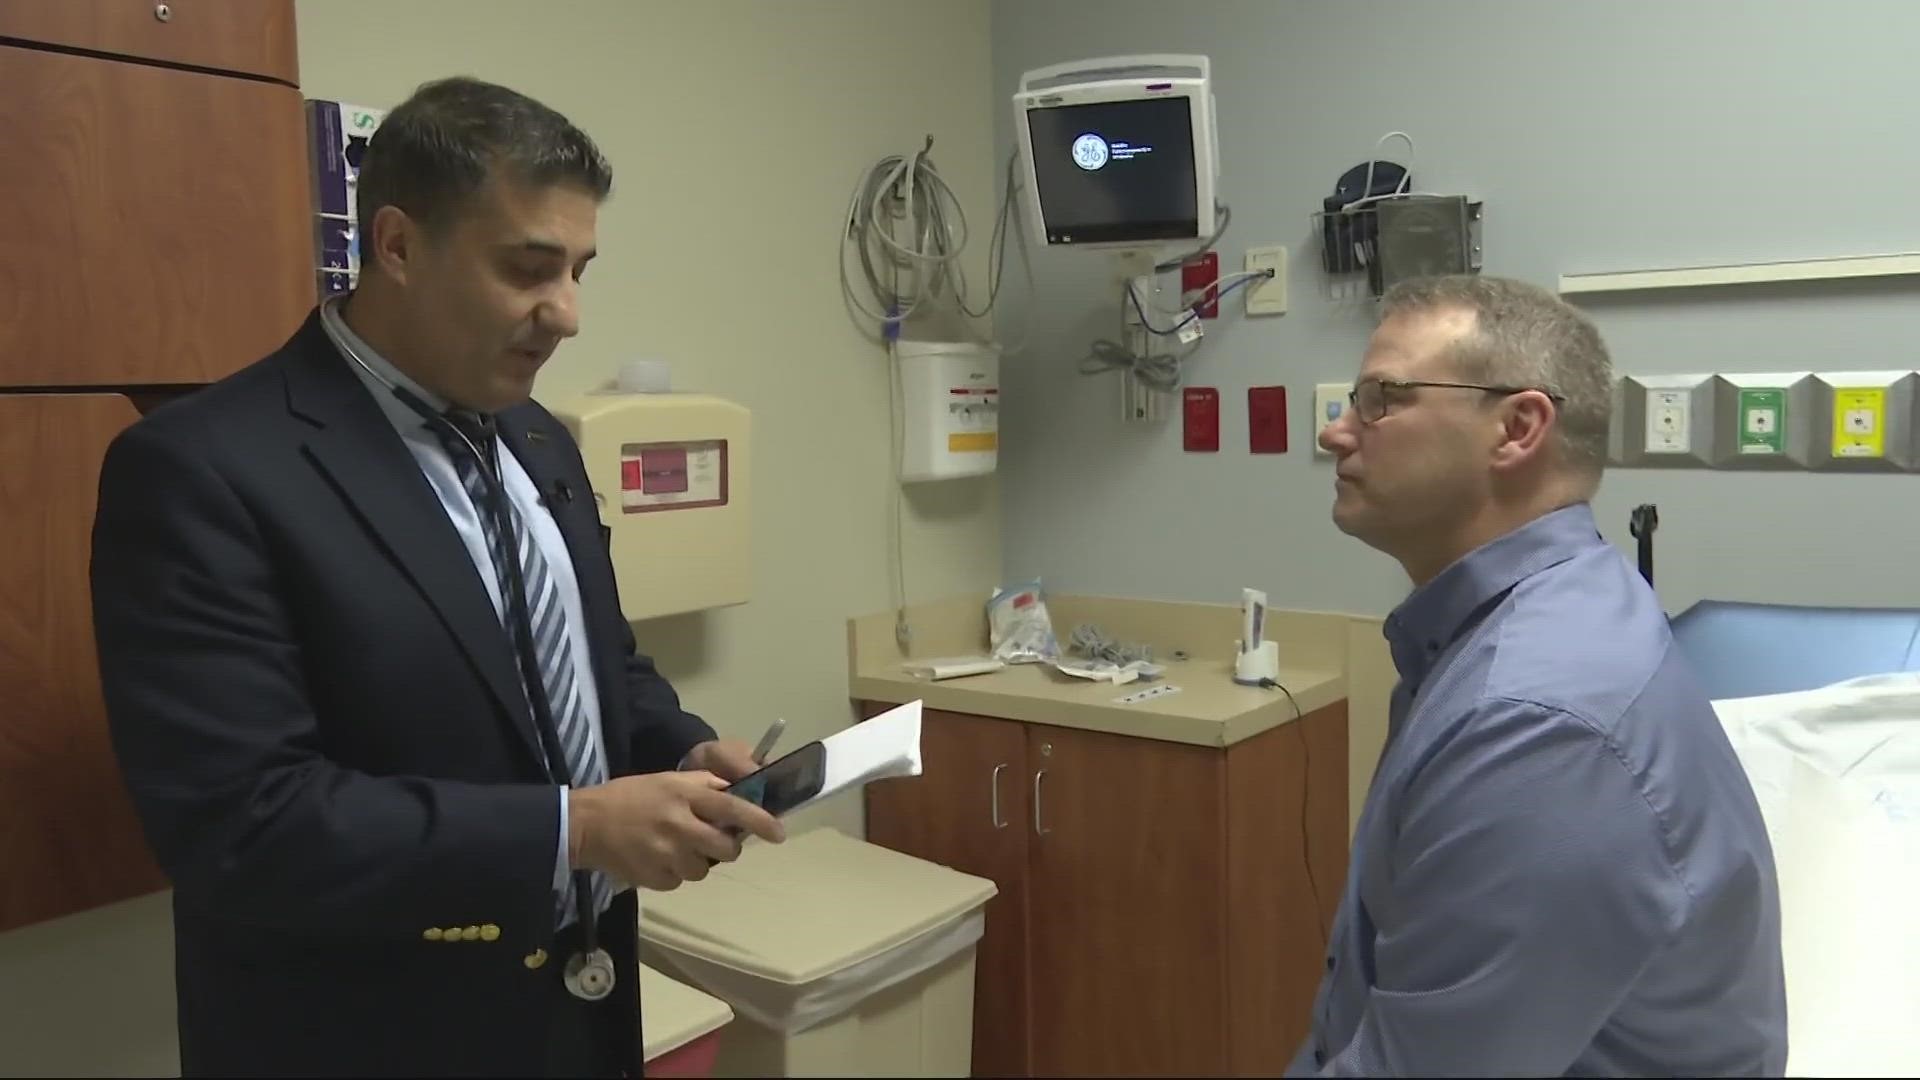 The treatment could benefit people suffering from pulmonary embolisms.